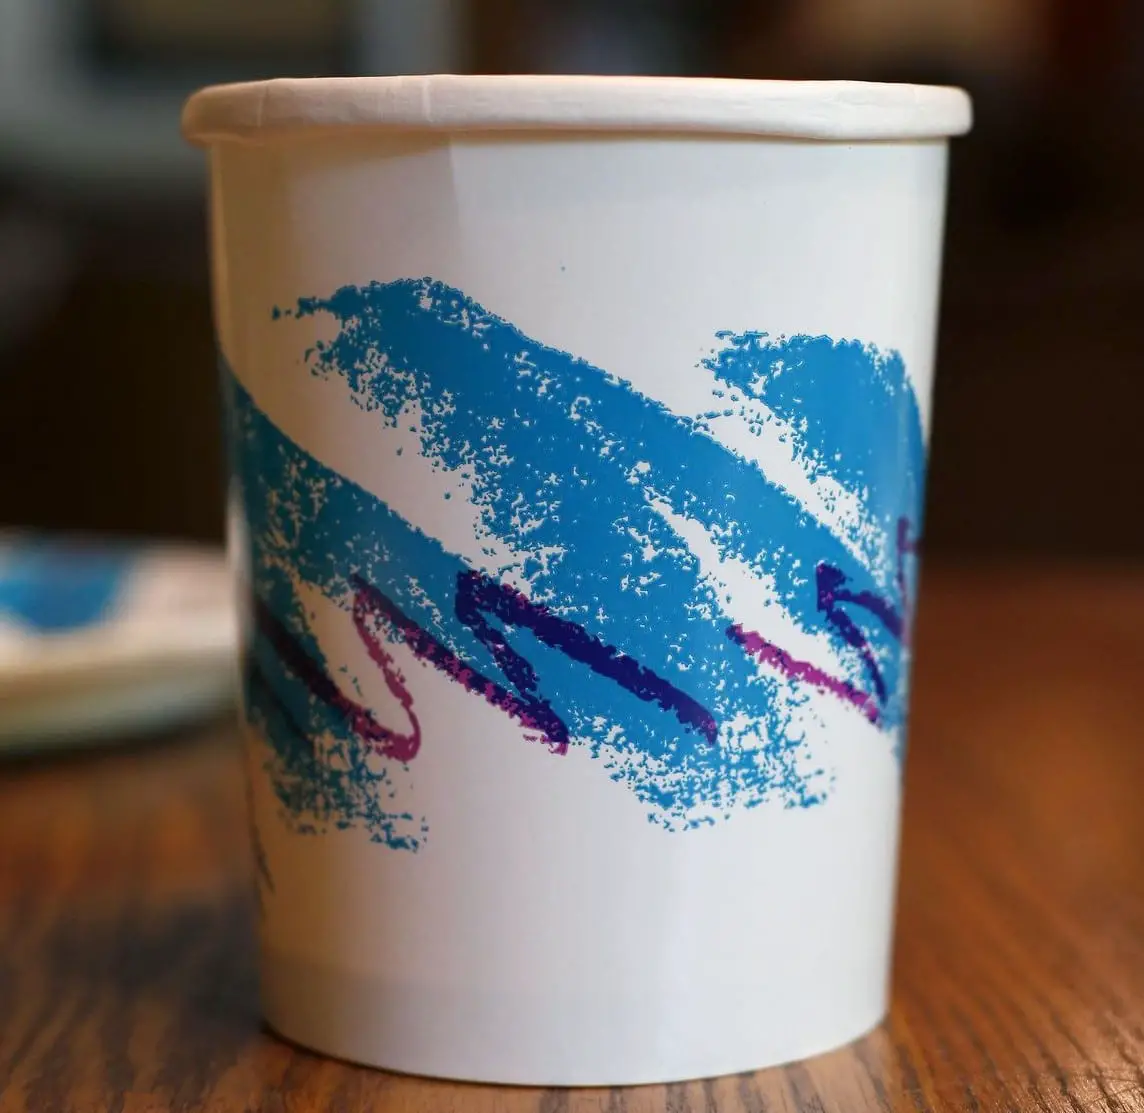 The Internet is looking for who designed this cup.